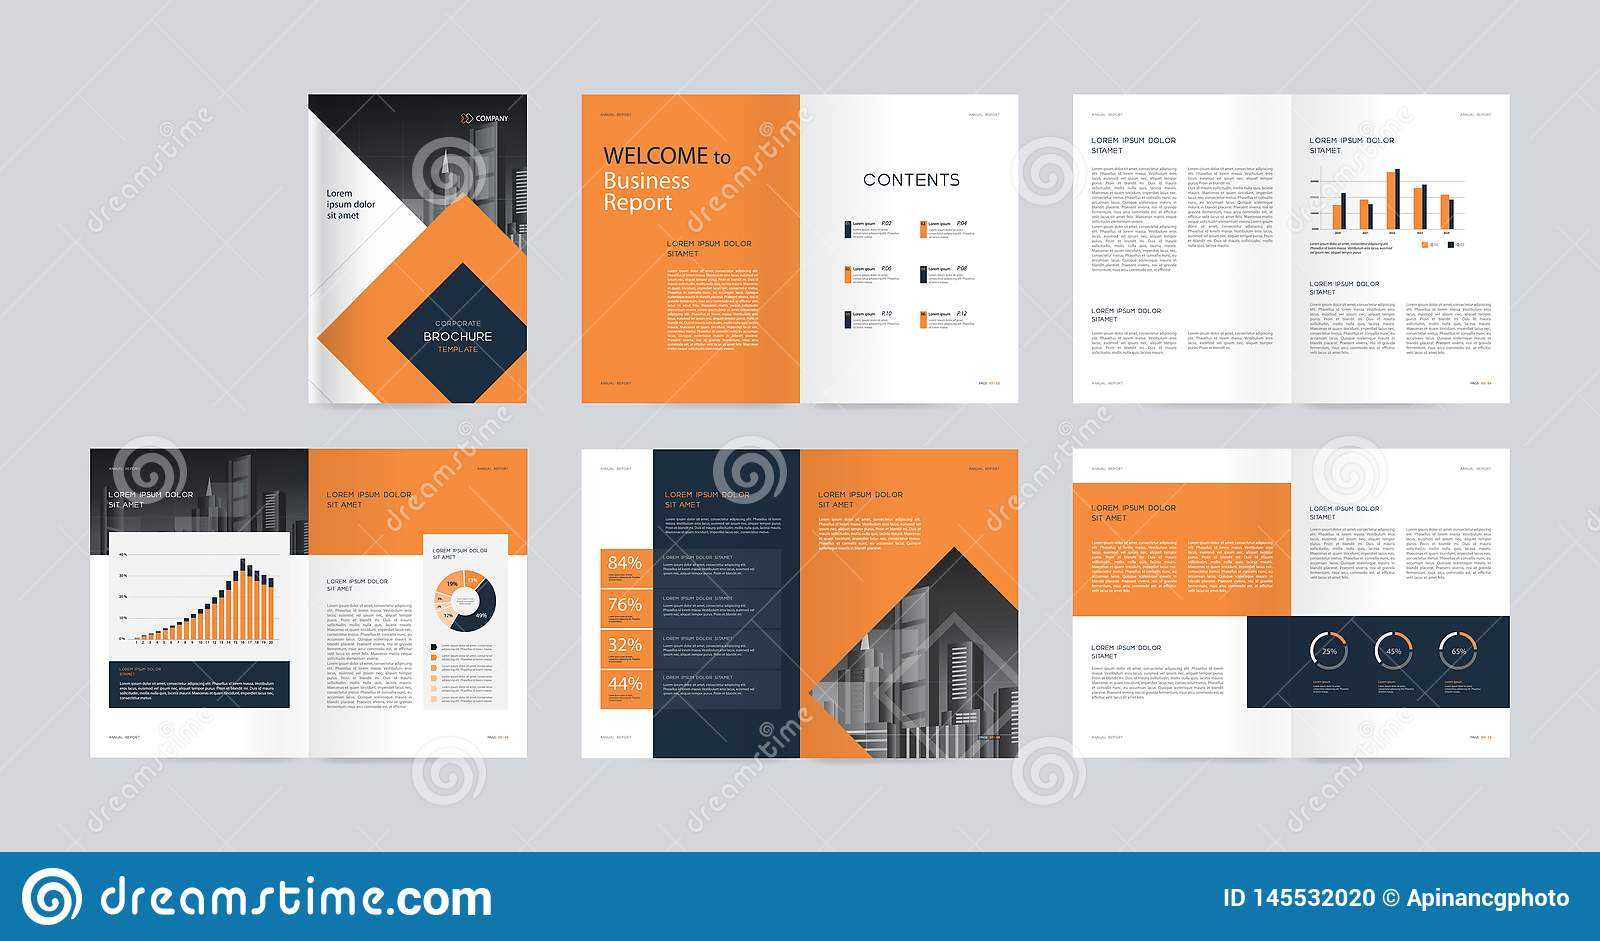 Template Layout Design With Cover Page For Company Profile Regarding Fancy Brochure Templates